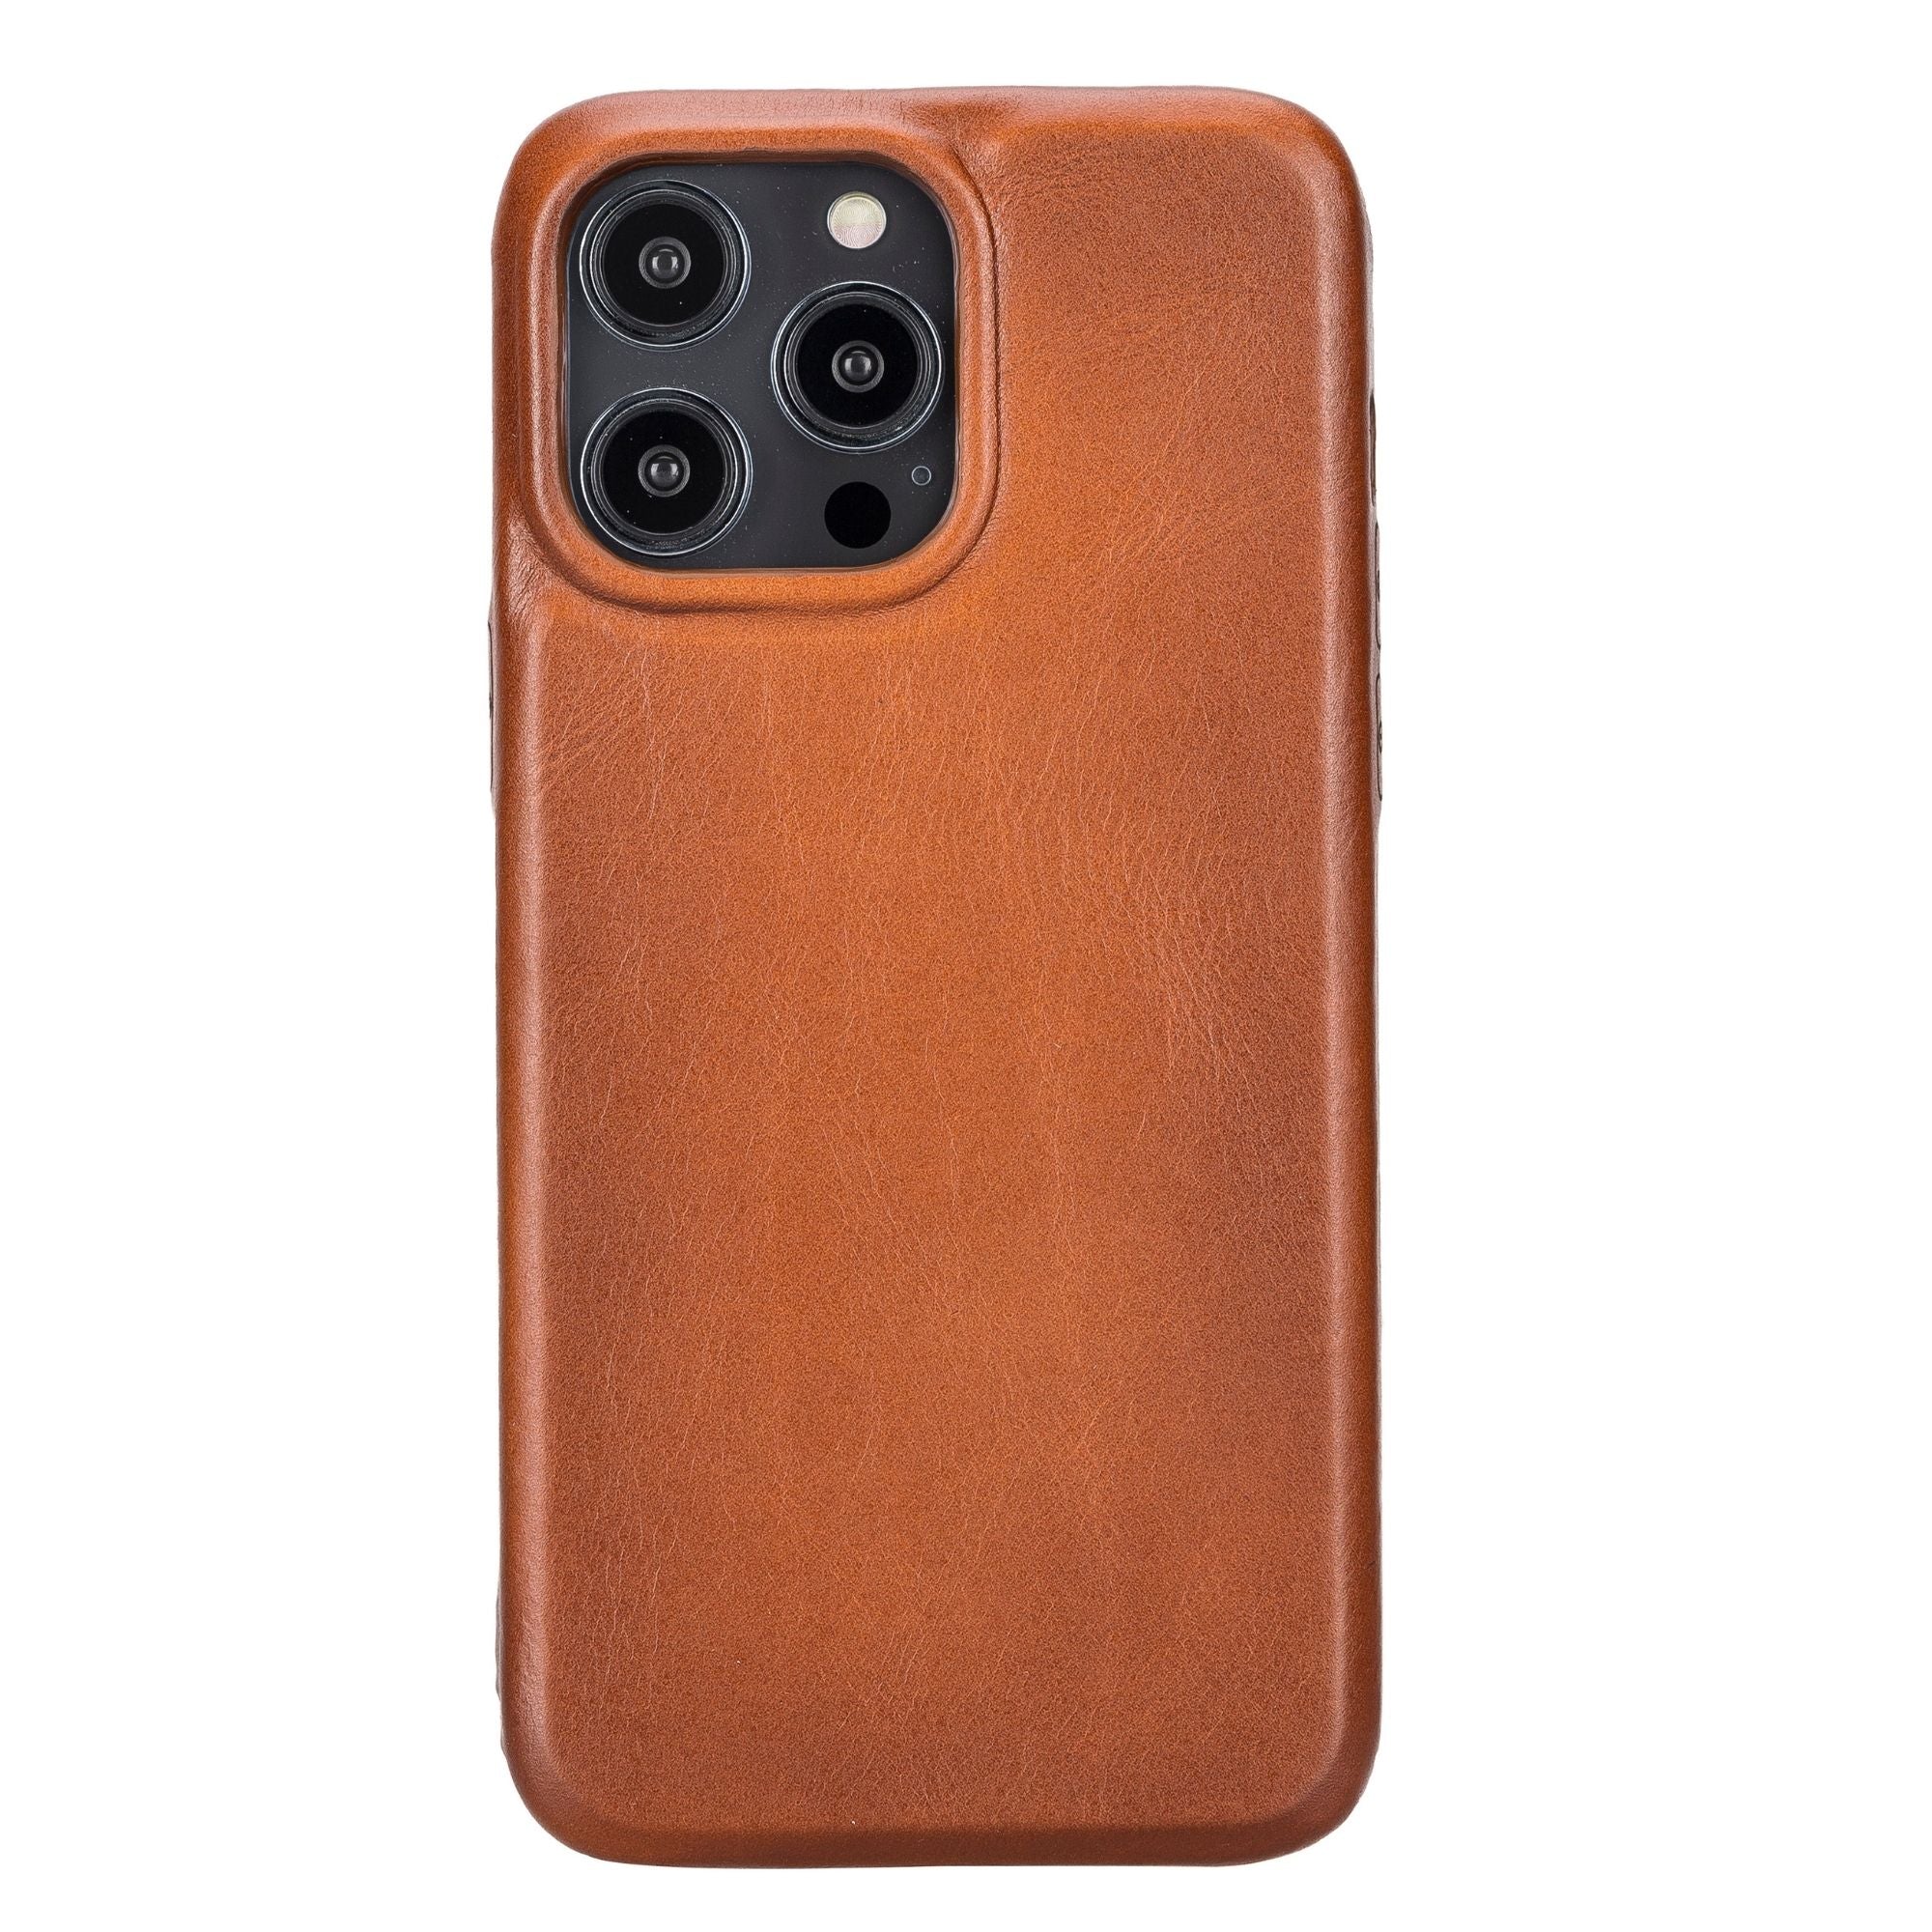 Pinedale Leather Snap-on Case for iPhone 11 Series - iPhone 11 Pro Max - Tan - TORONATA